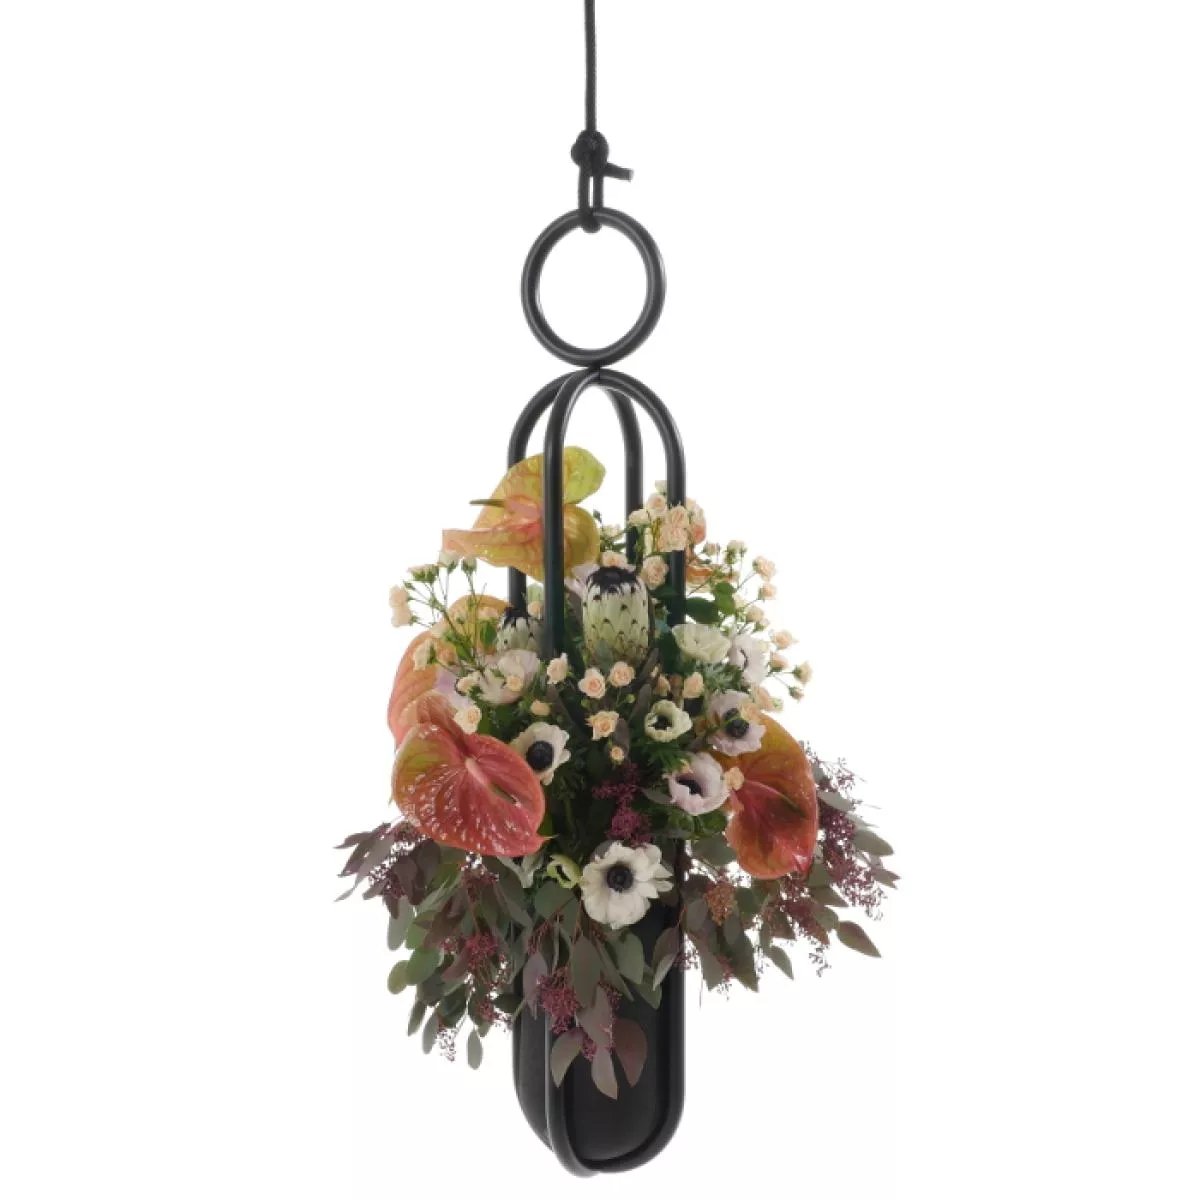 Upright flower suspension (pot or vase) with handmade rubber container